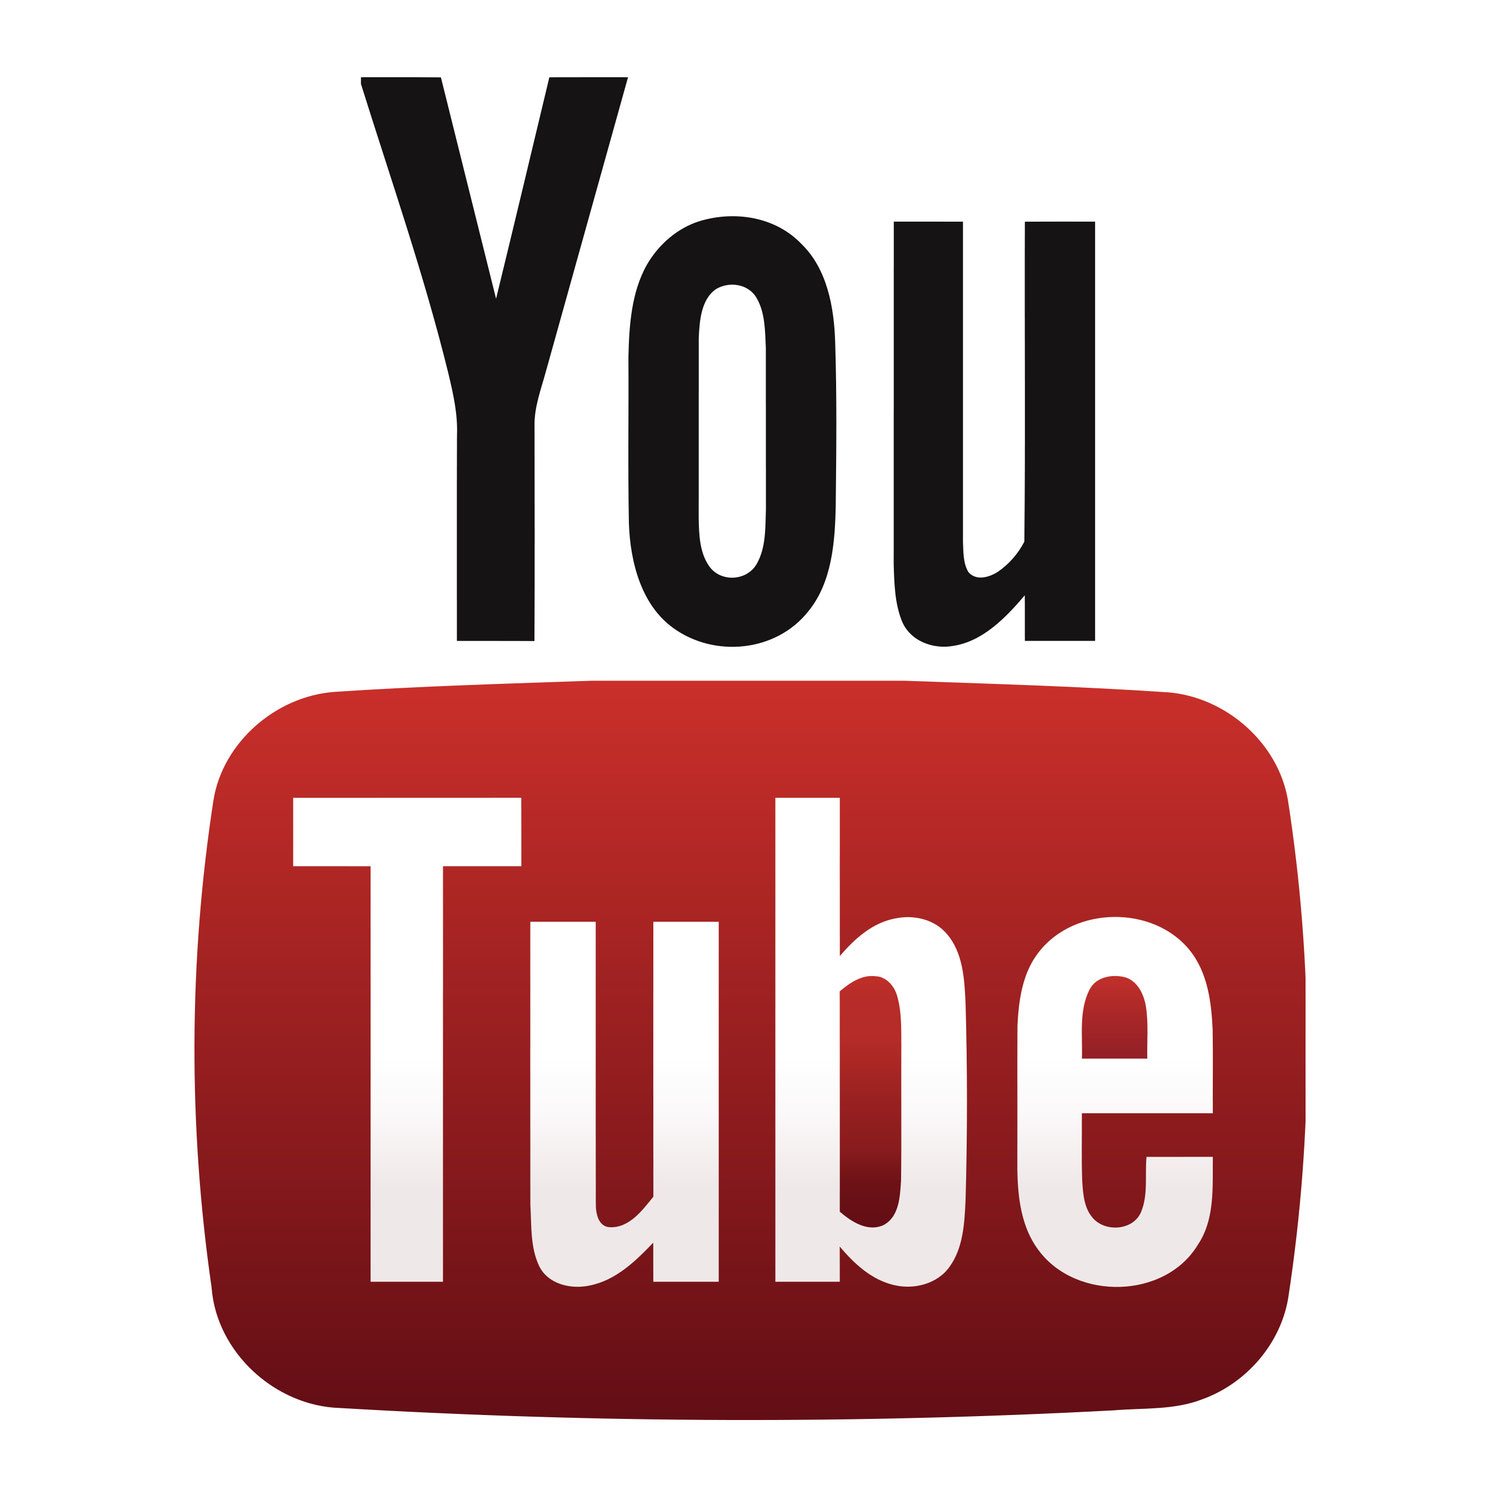 Notre chaine Youtube 